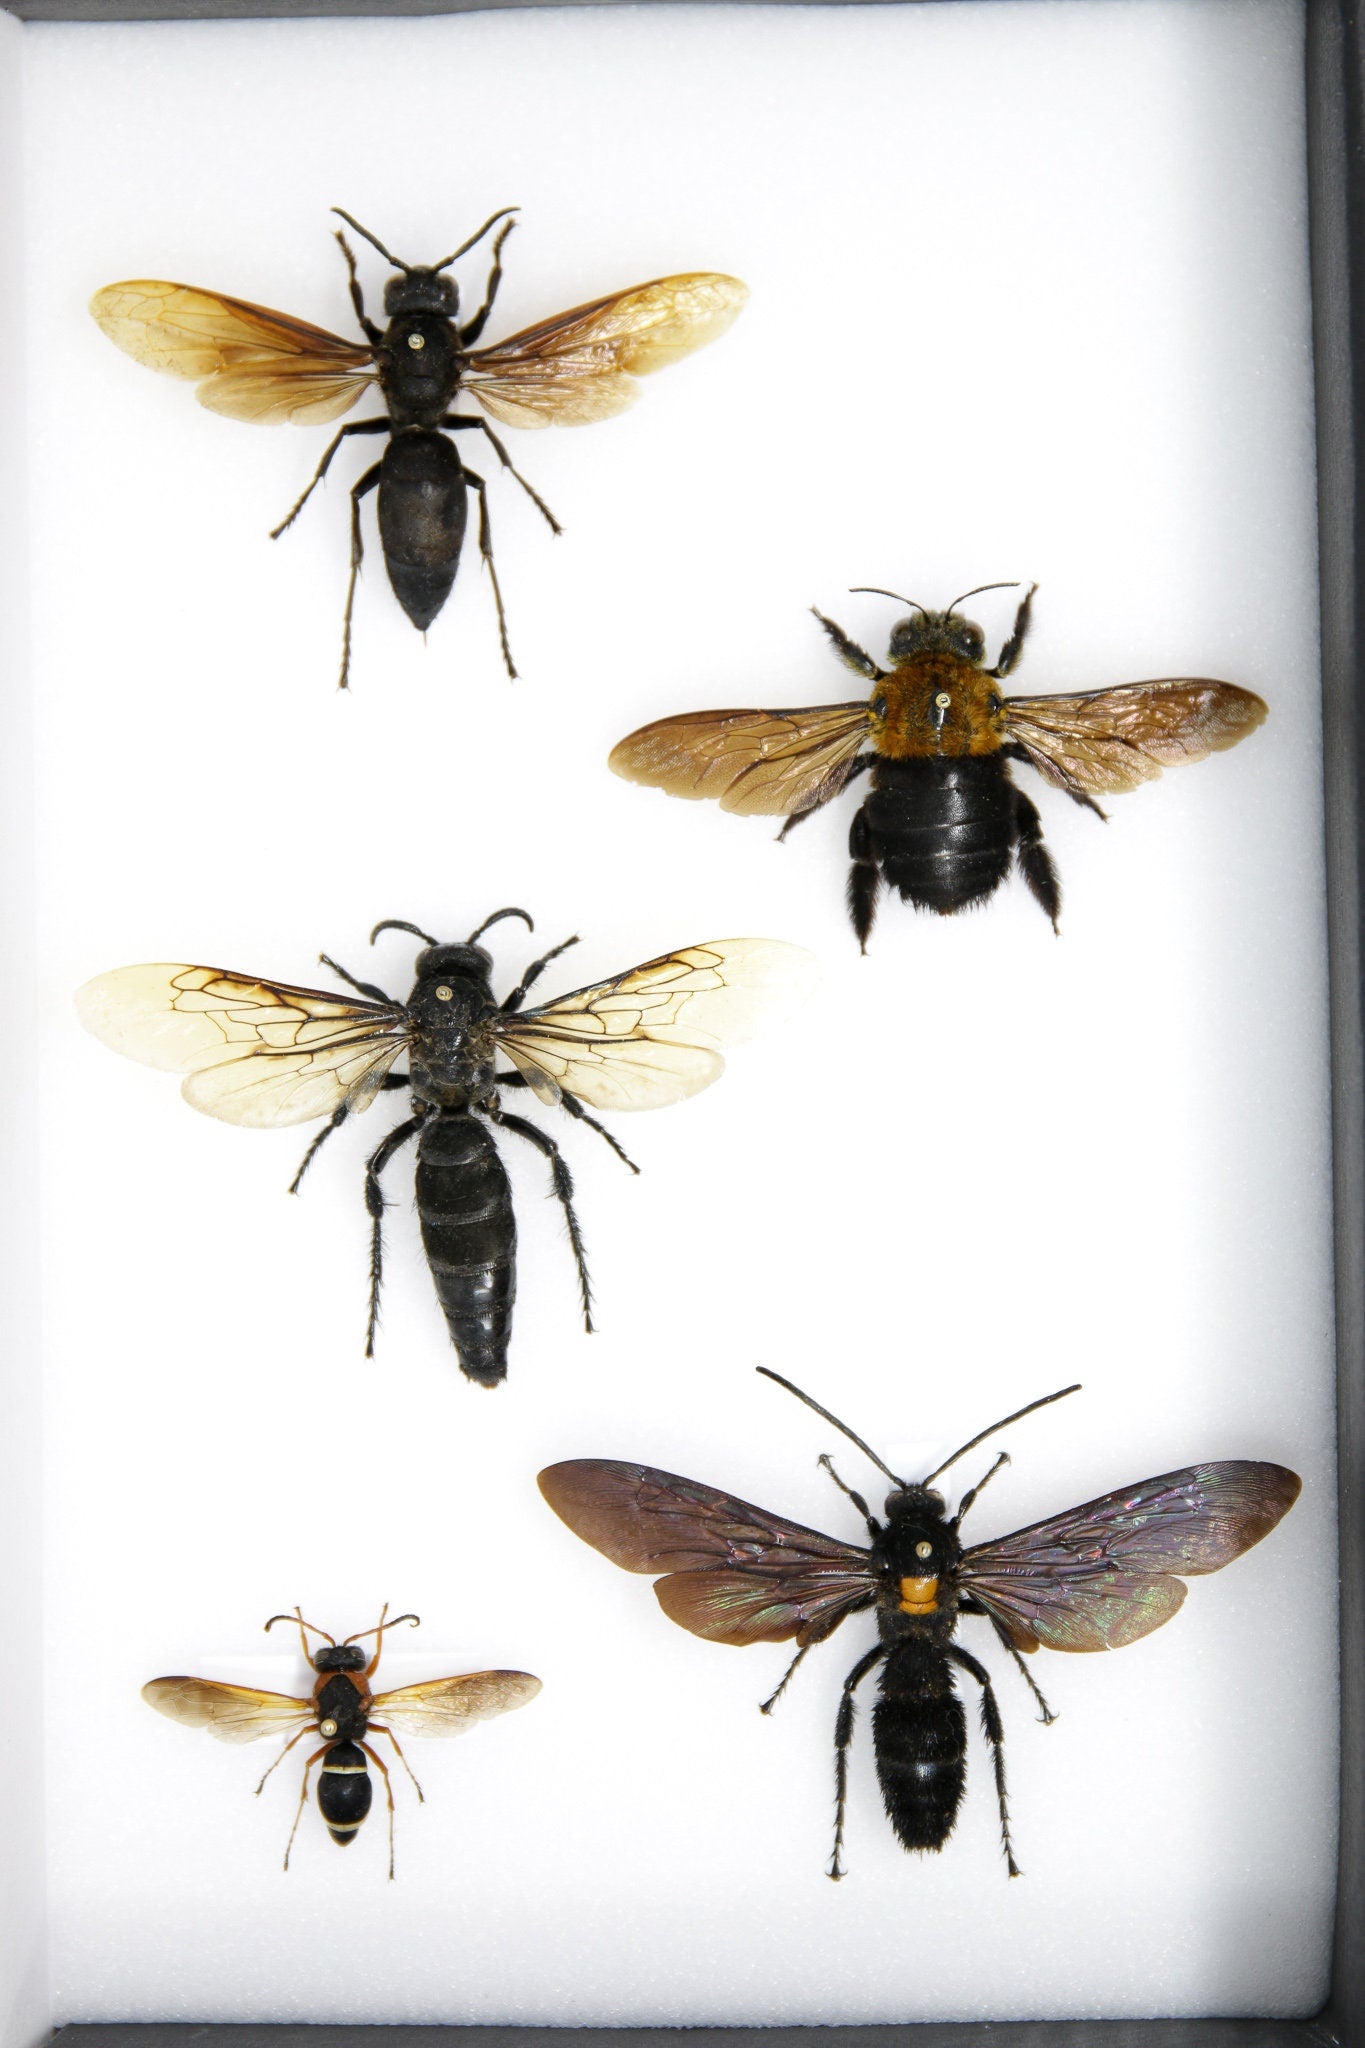 A Collection of Bees & Wasps (Hymenoptera)  inc. Scientific Collection Data, A1 Quality, Entomology, Real Insect Specimens #SE23